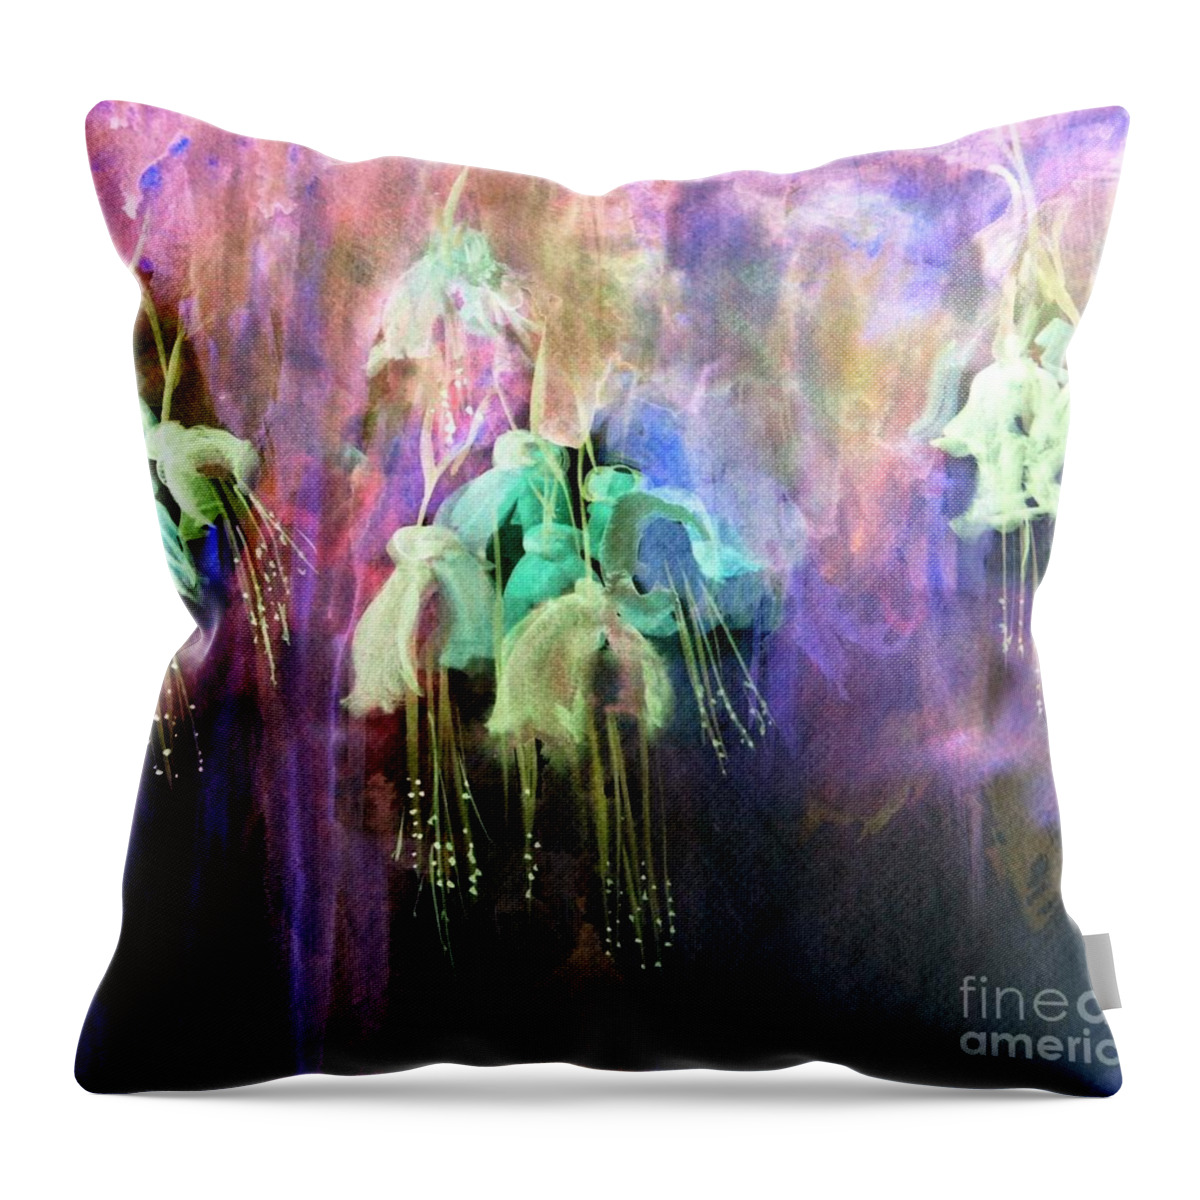 Flowers Throw Pillow featuring the painting Fuchsia Flowers by Julie Lueders 